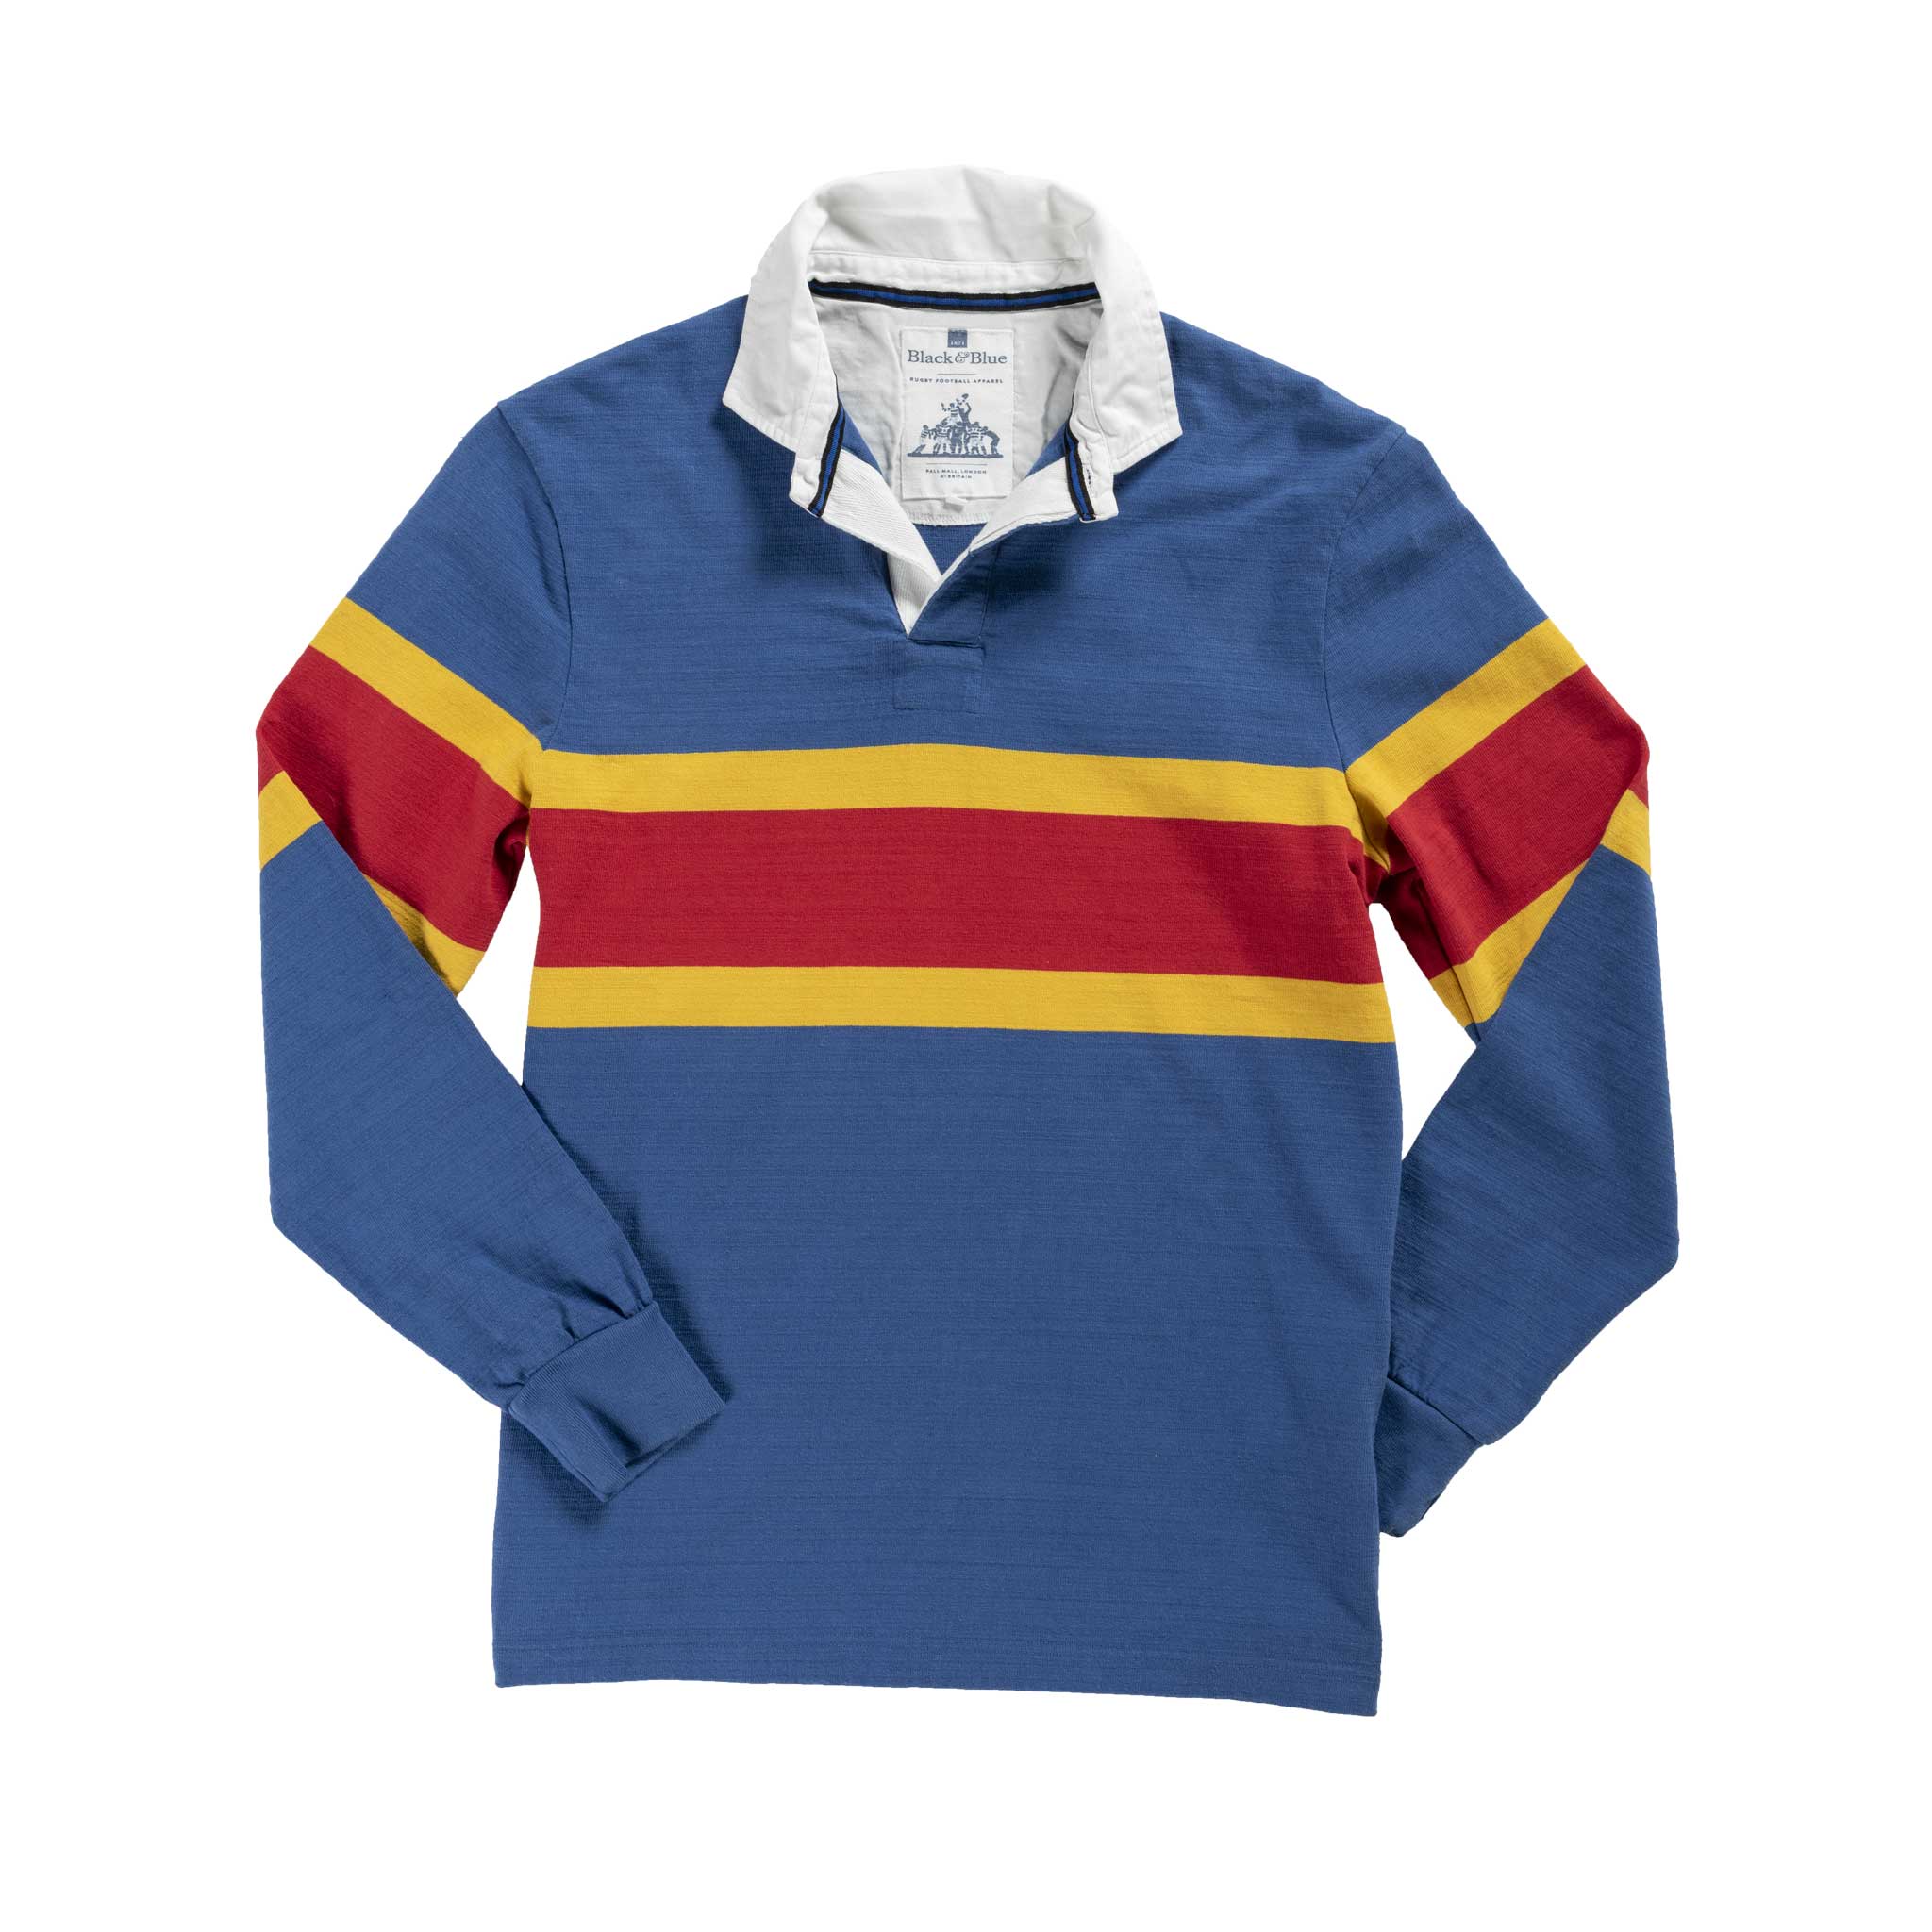 Black&Blue Outdoor Hertitage Rugby Shirt